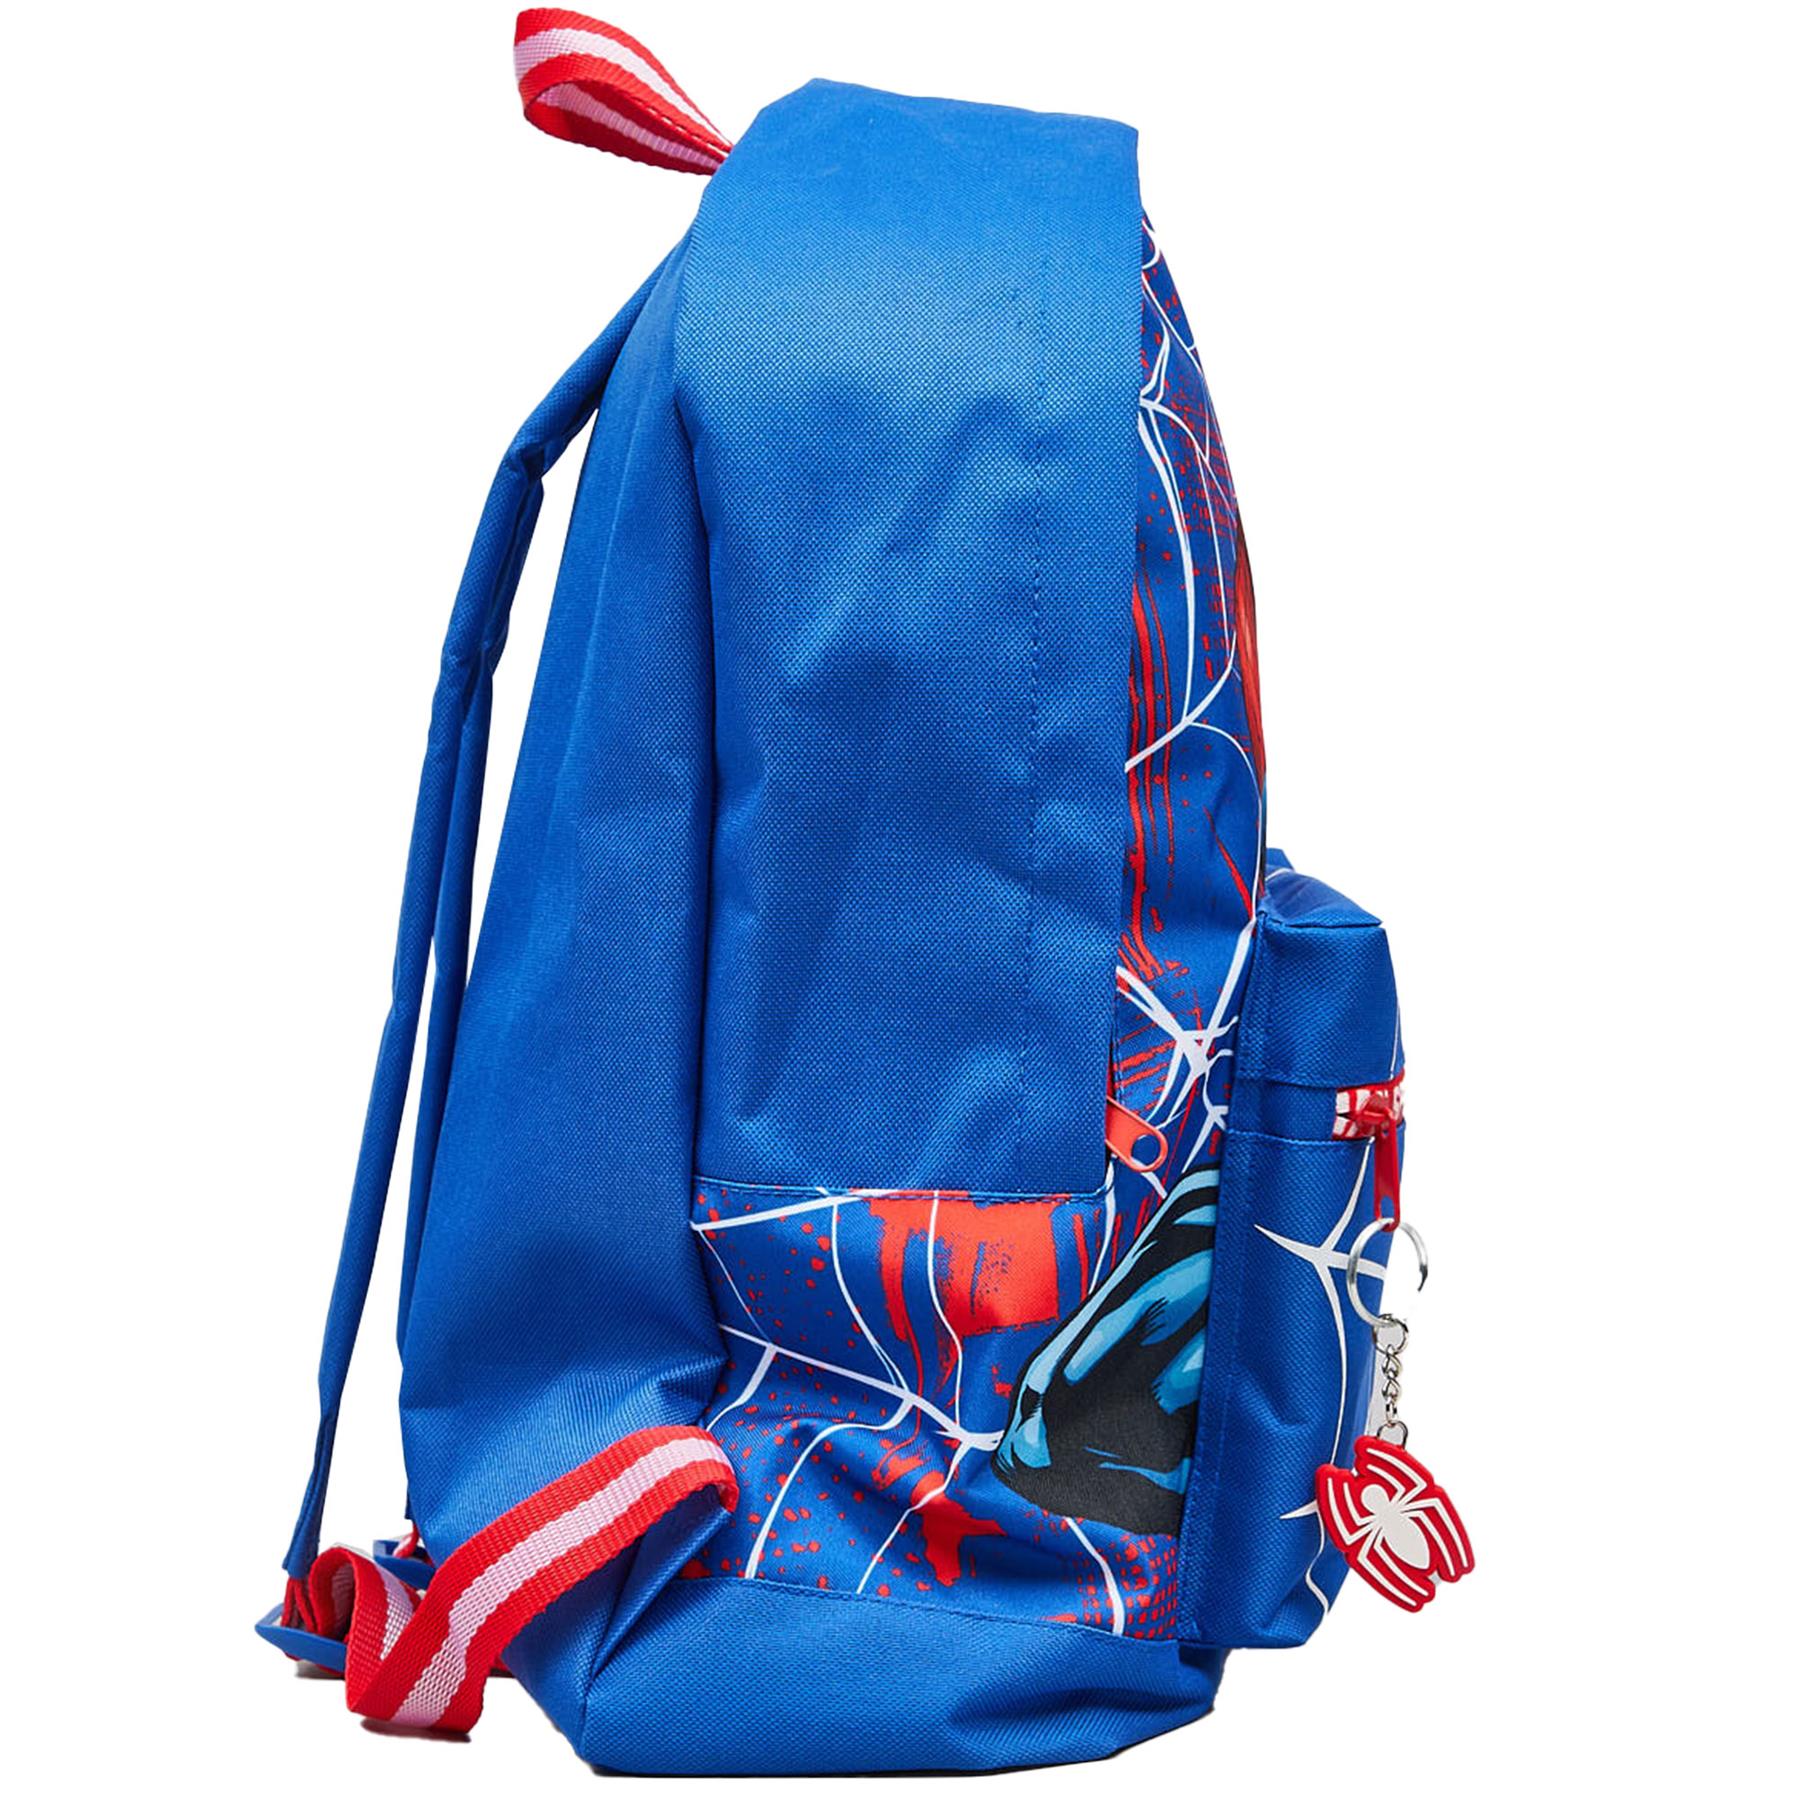 Boys Spiderman Backpack Officially Licensed Marvel Amazing Roxy Urban Sports Bag